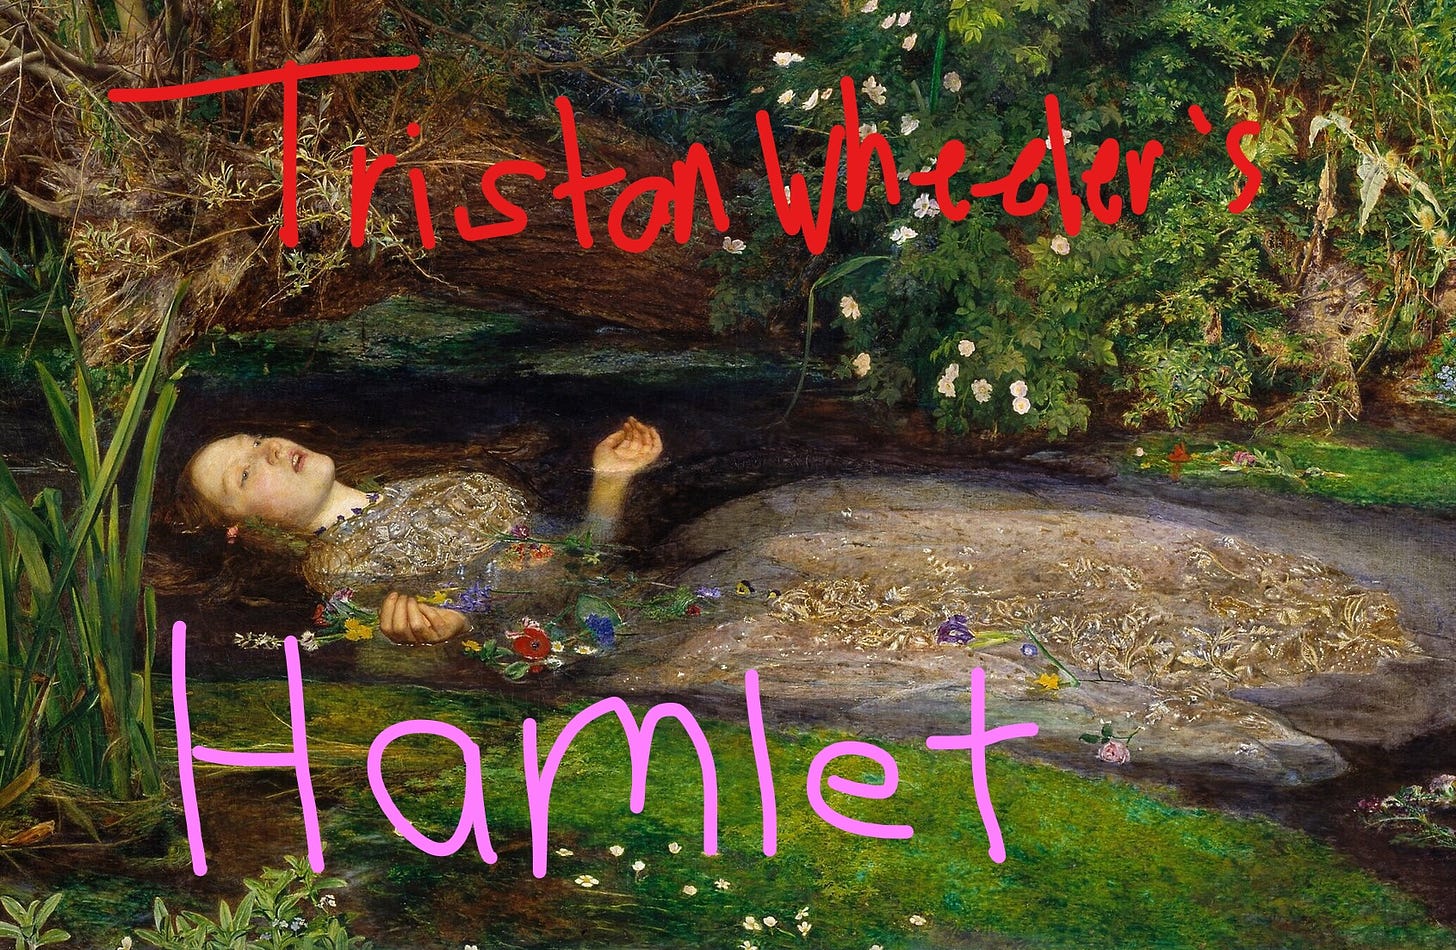 The famous painting of Ophelia drowning but with Tristan Wheeler's Hamlet written over top with a computer mouse.